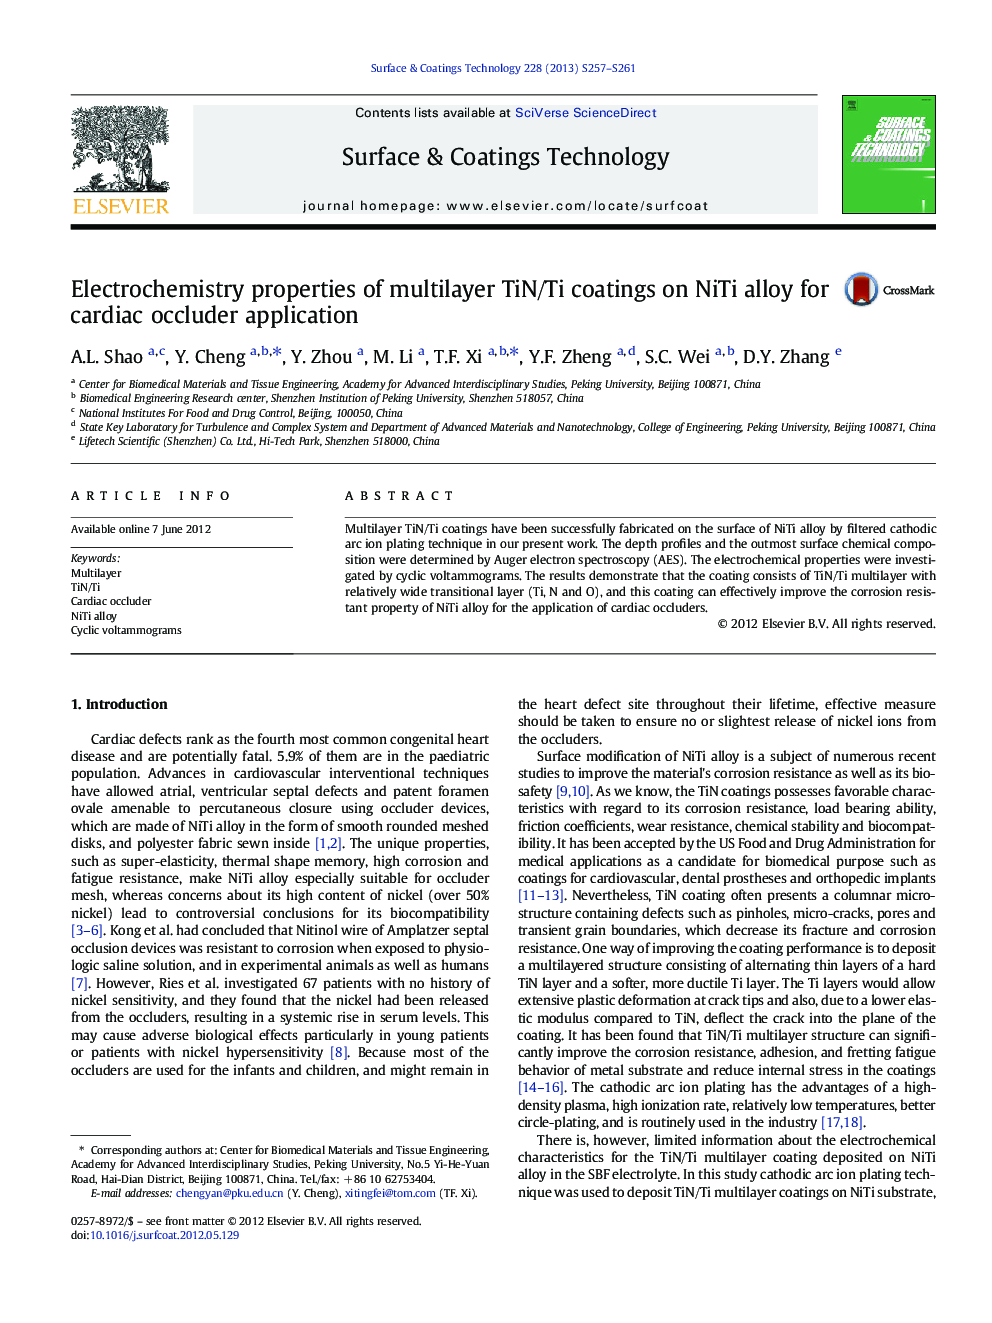 Electrochemistry properties of multilayer TiN/Ti coatings on NiTi alloy for cardiac occluder application